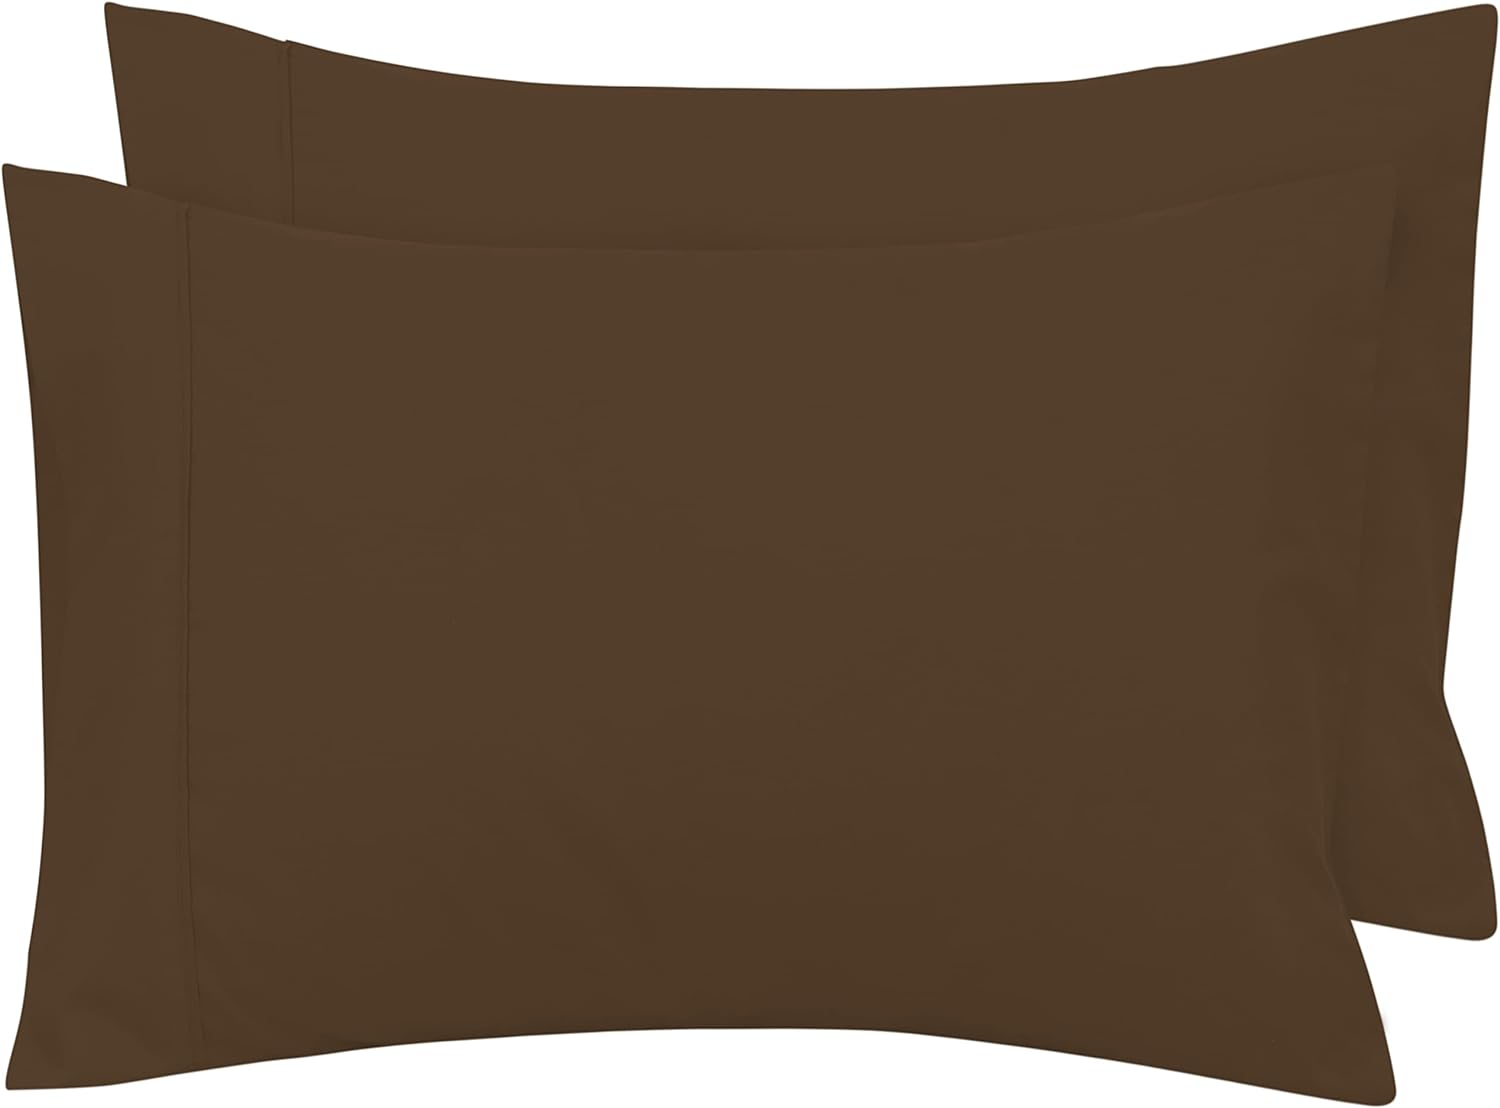 Royale Linens Queen Pillowcase Set of 2 - 20x30 Inch Chocolate Microfiber Pillowcases - OEKO-TEX Certified, Machine Washable